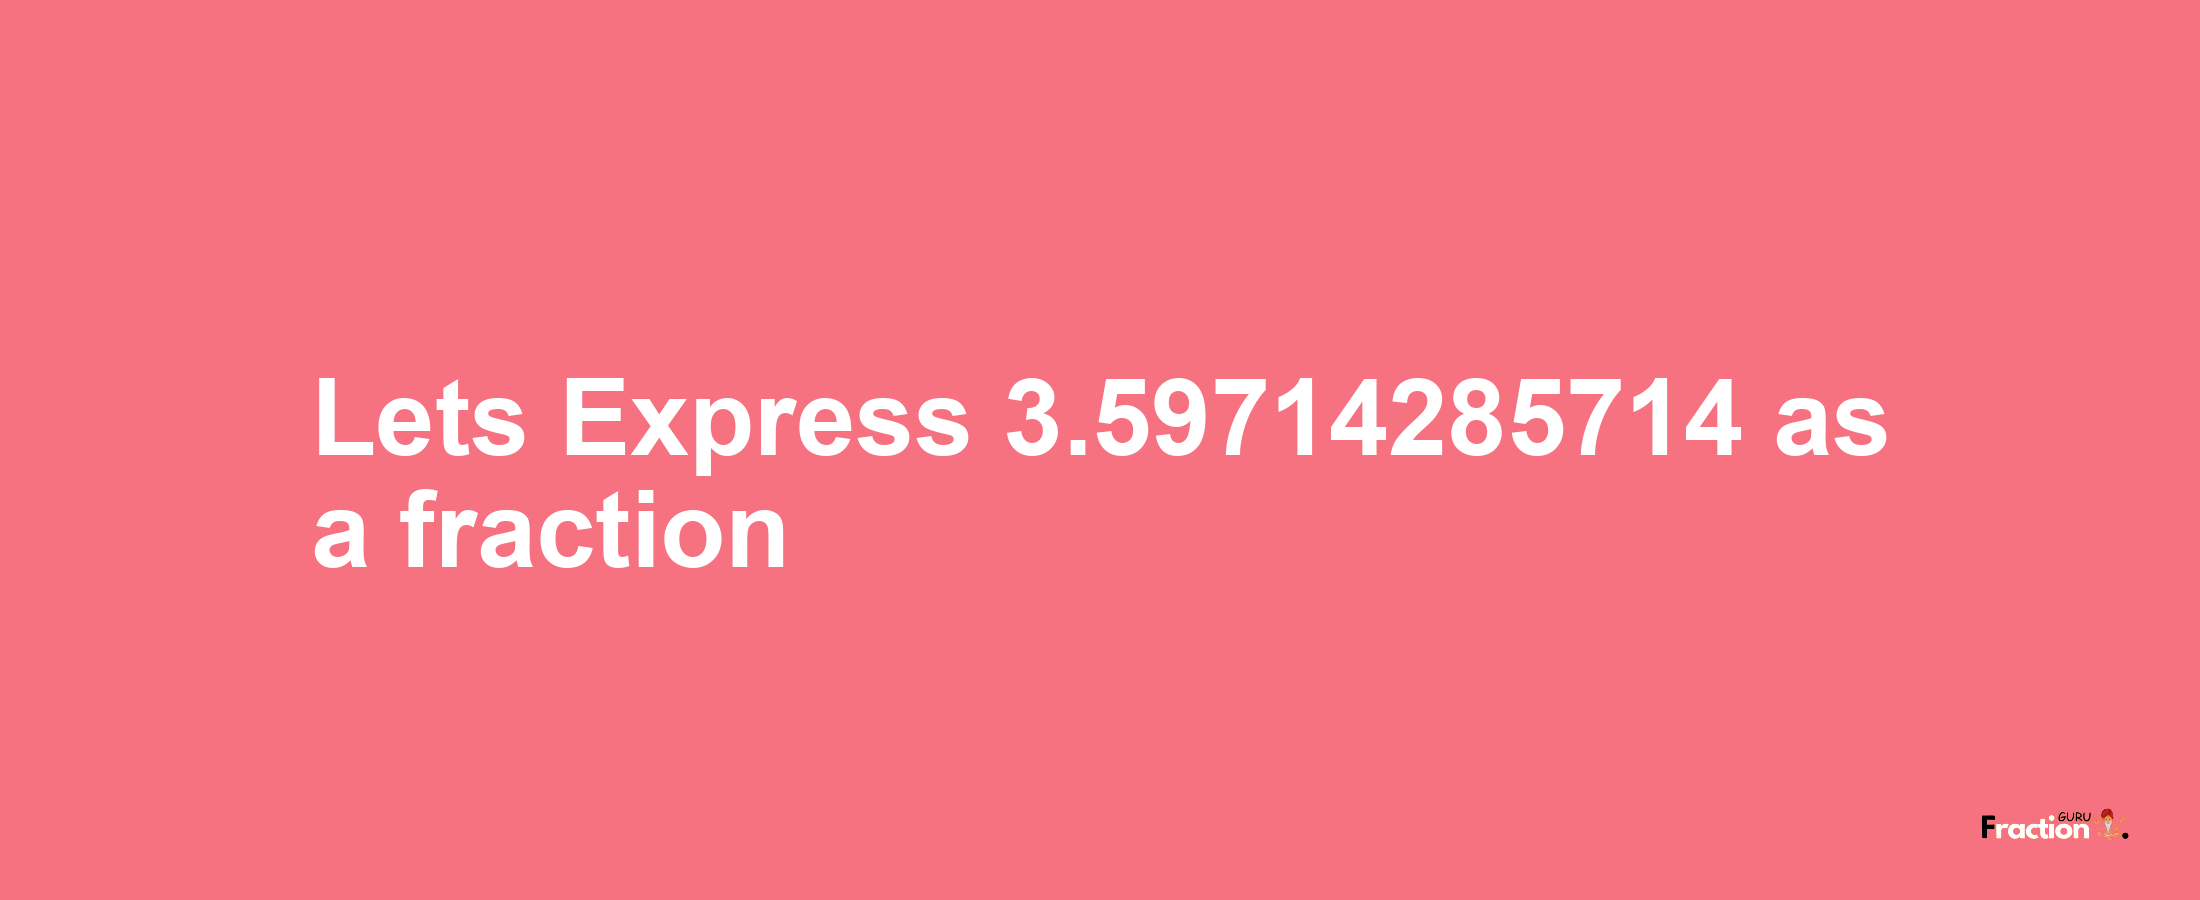 Lets Express 3.59714285714 as afraction